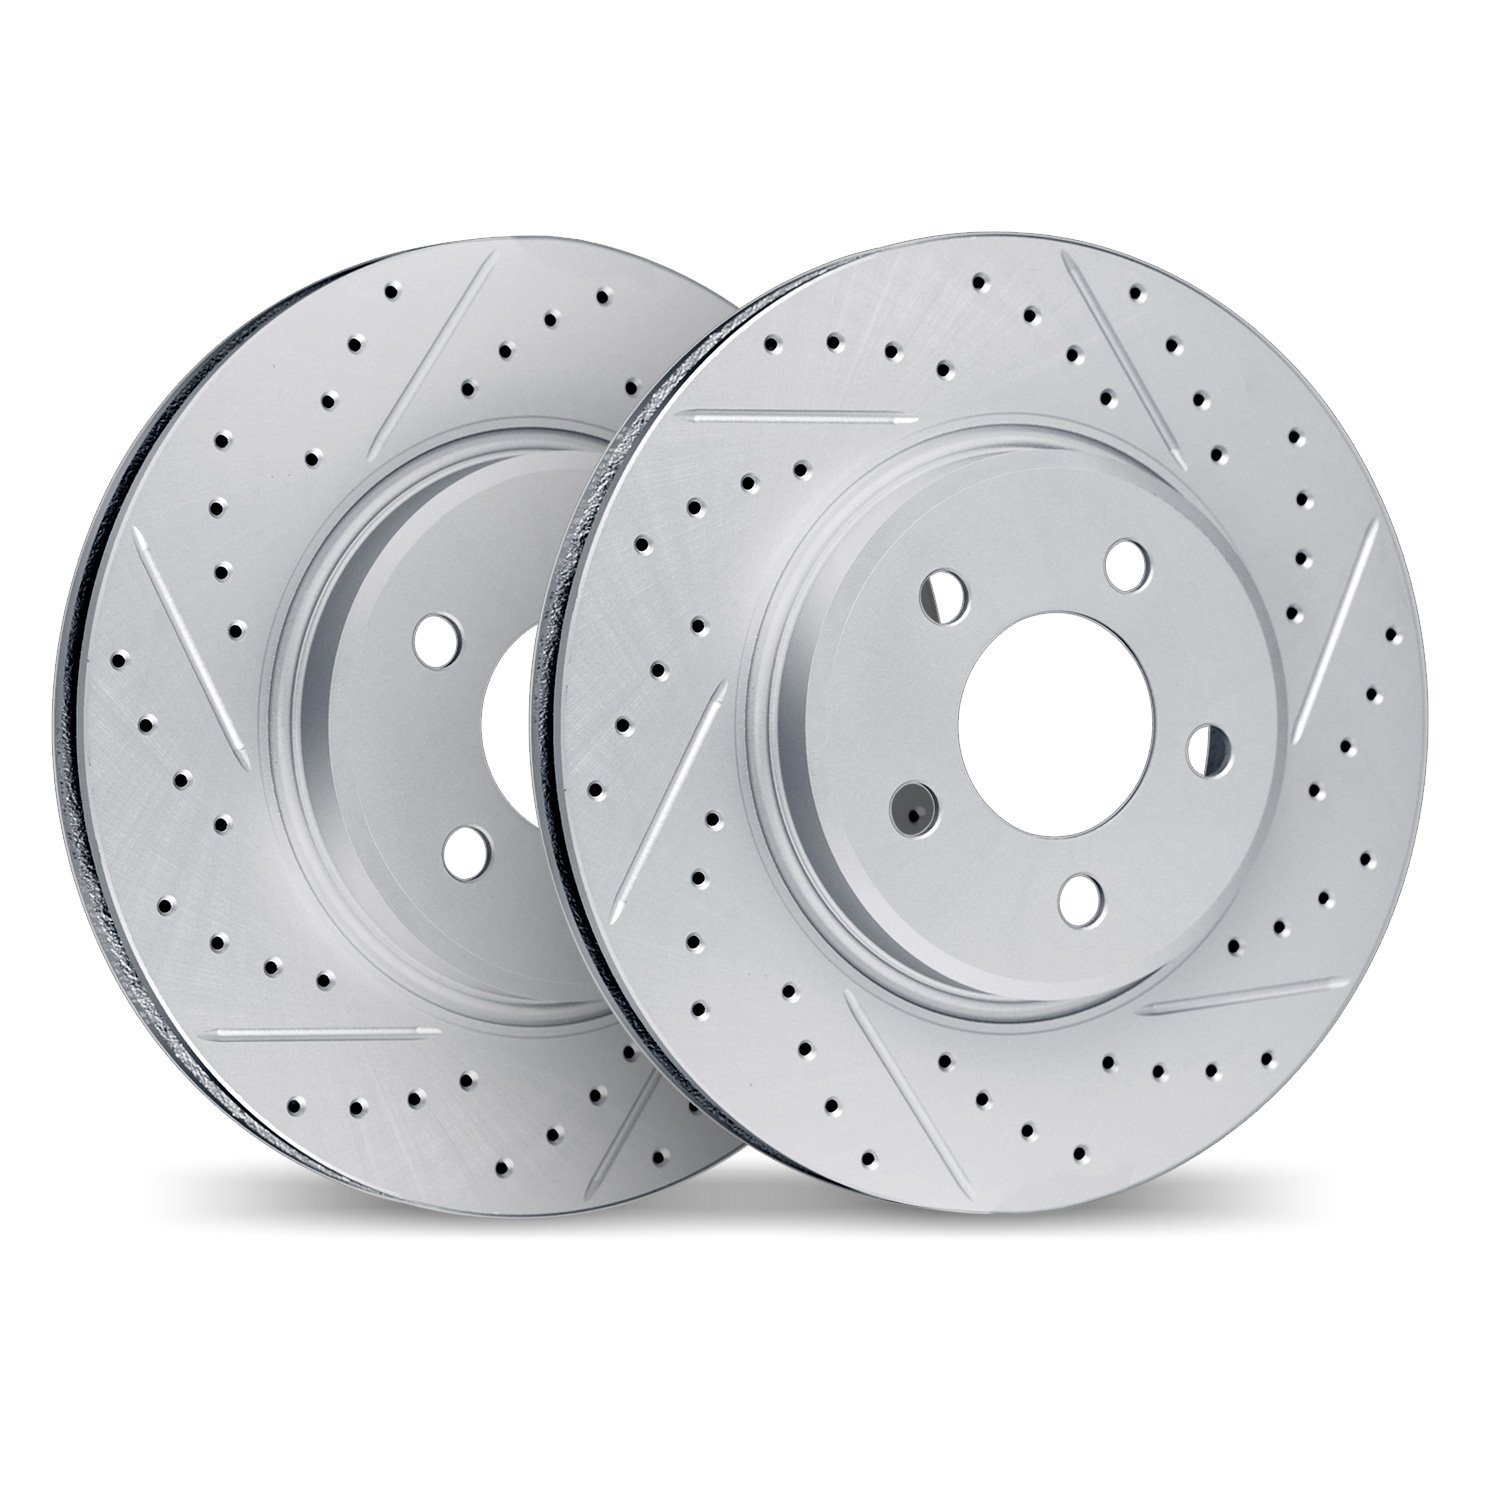 2002-27013 Geoperformance Drilled/Slotted Brake Rotors, 2007-2016 Volvo, Position: Front